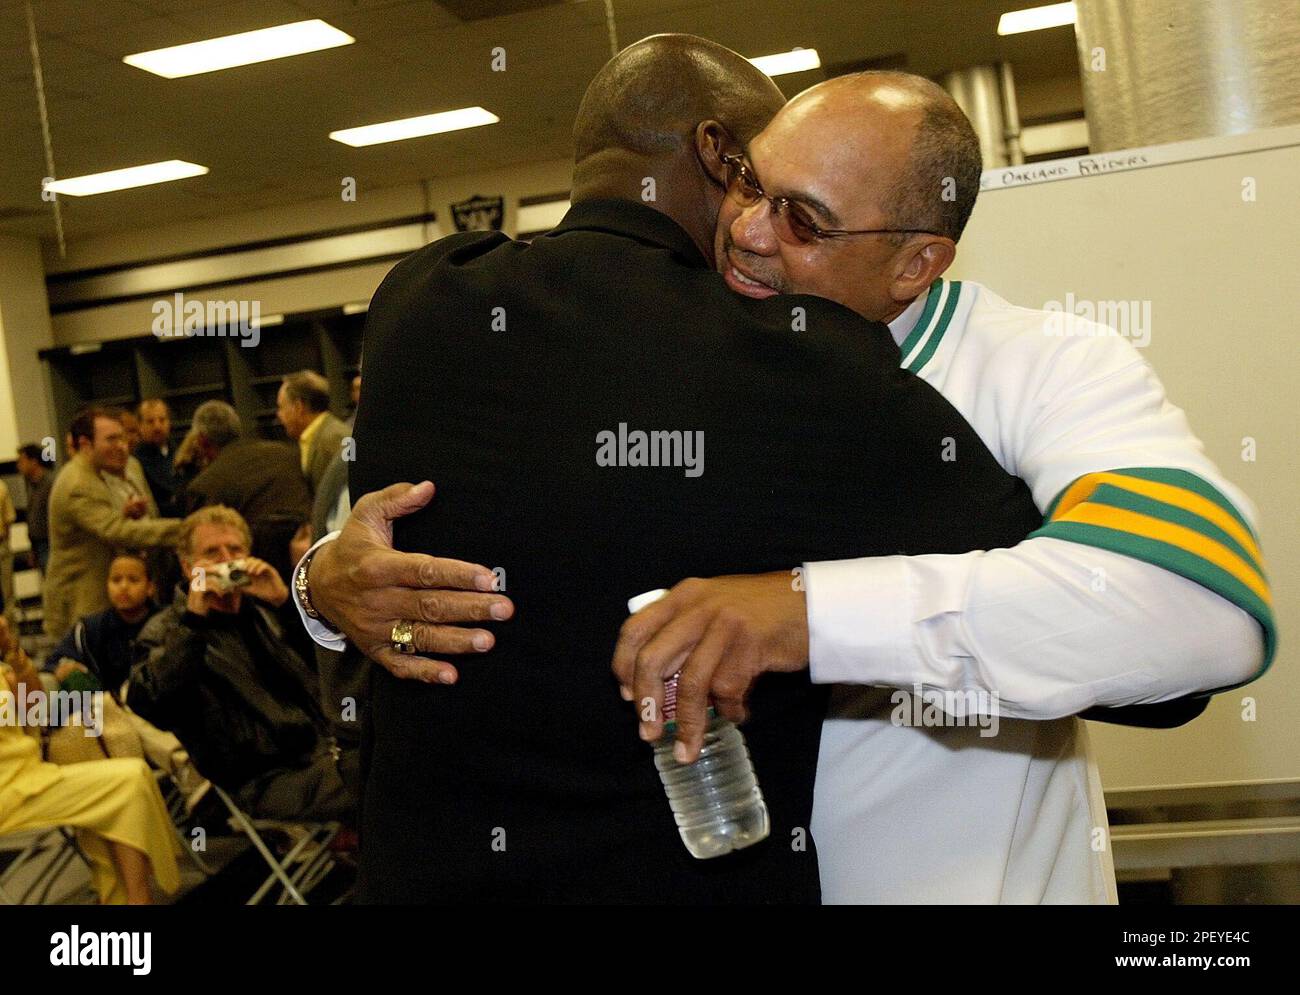 Reggie Jackson, right, hugs former teammate Dave Stewart at a news  conference to retire his number with the Oakland Athletics before the  Athletics played the Kansas City Royals in Oakland, Calif. on